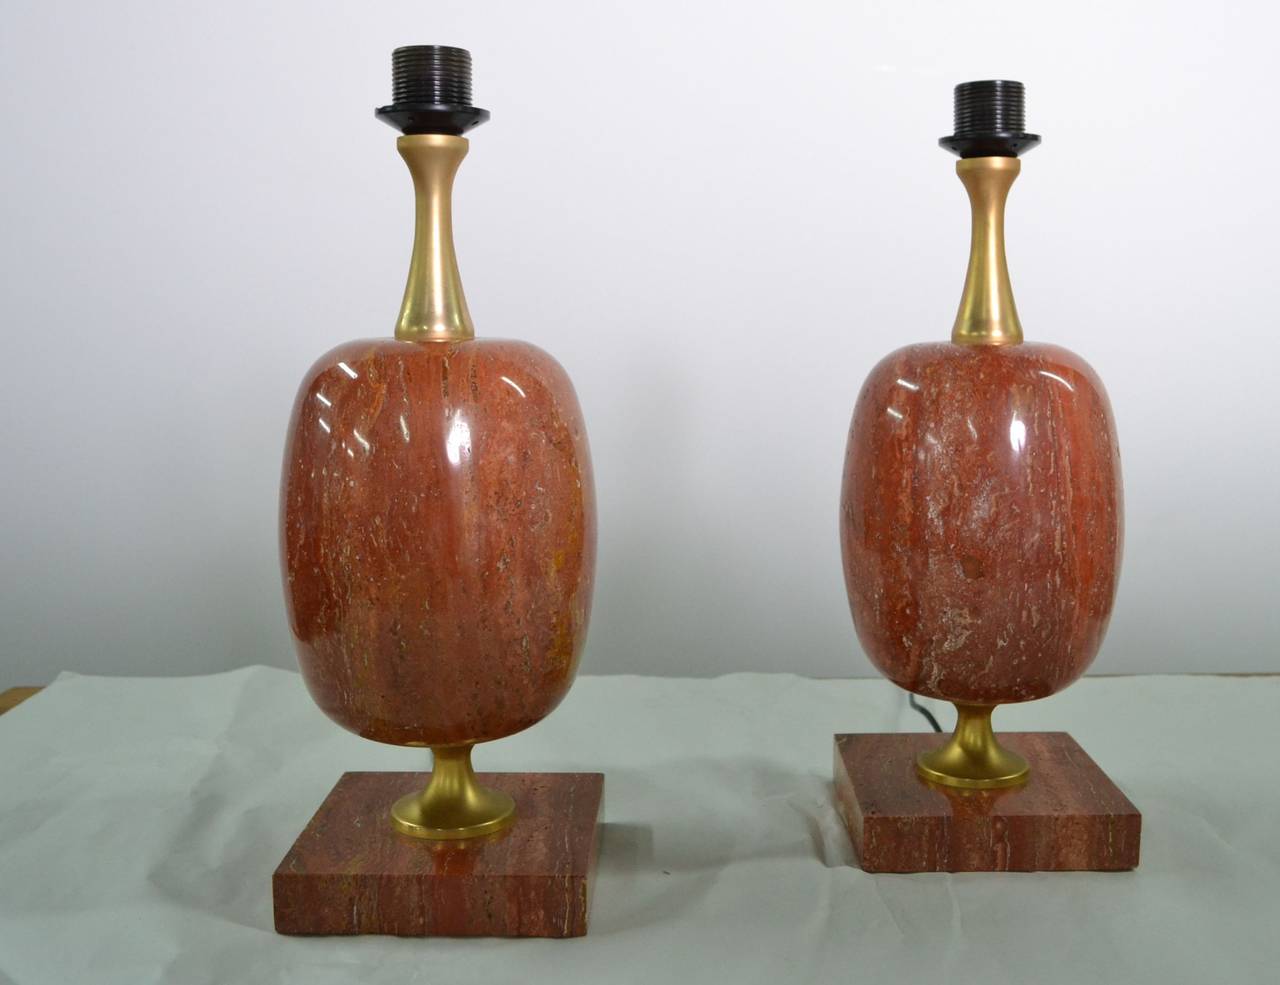 Pair of rose marble and lacquered brass table lamps
with new paper shades.